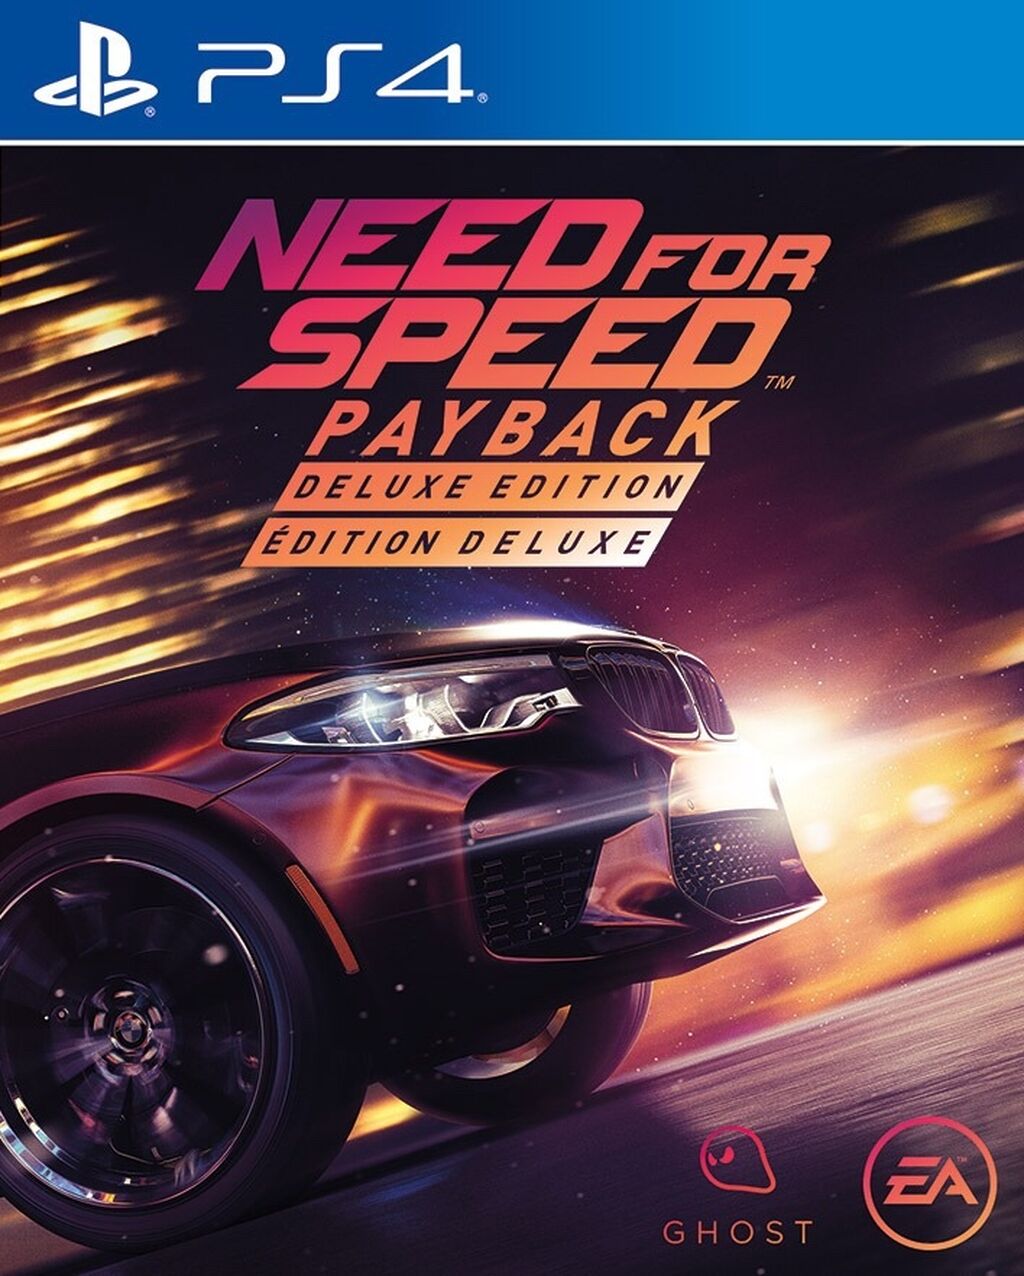 Need for Speed: Payback - Deluxe Edition [PS4] 5.05 / 6.72 / 7.02 [EUR] (2017) [Русский] (v1.10)